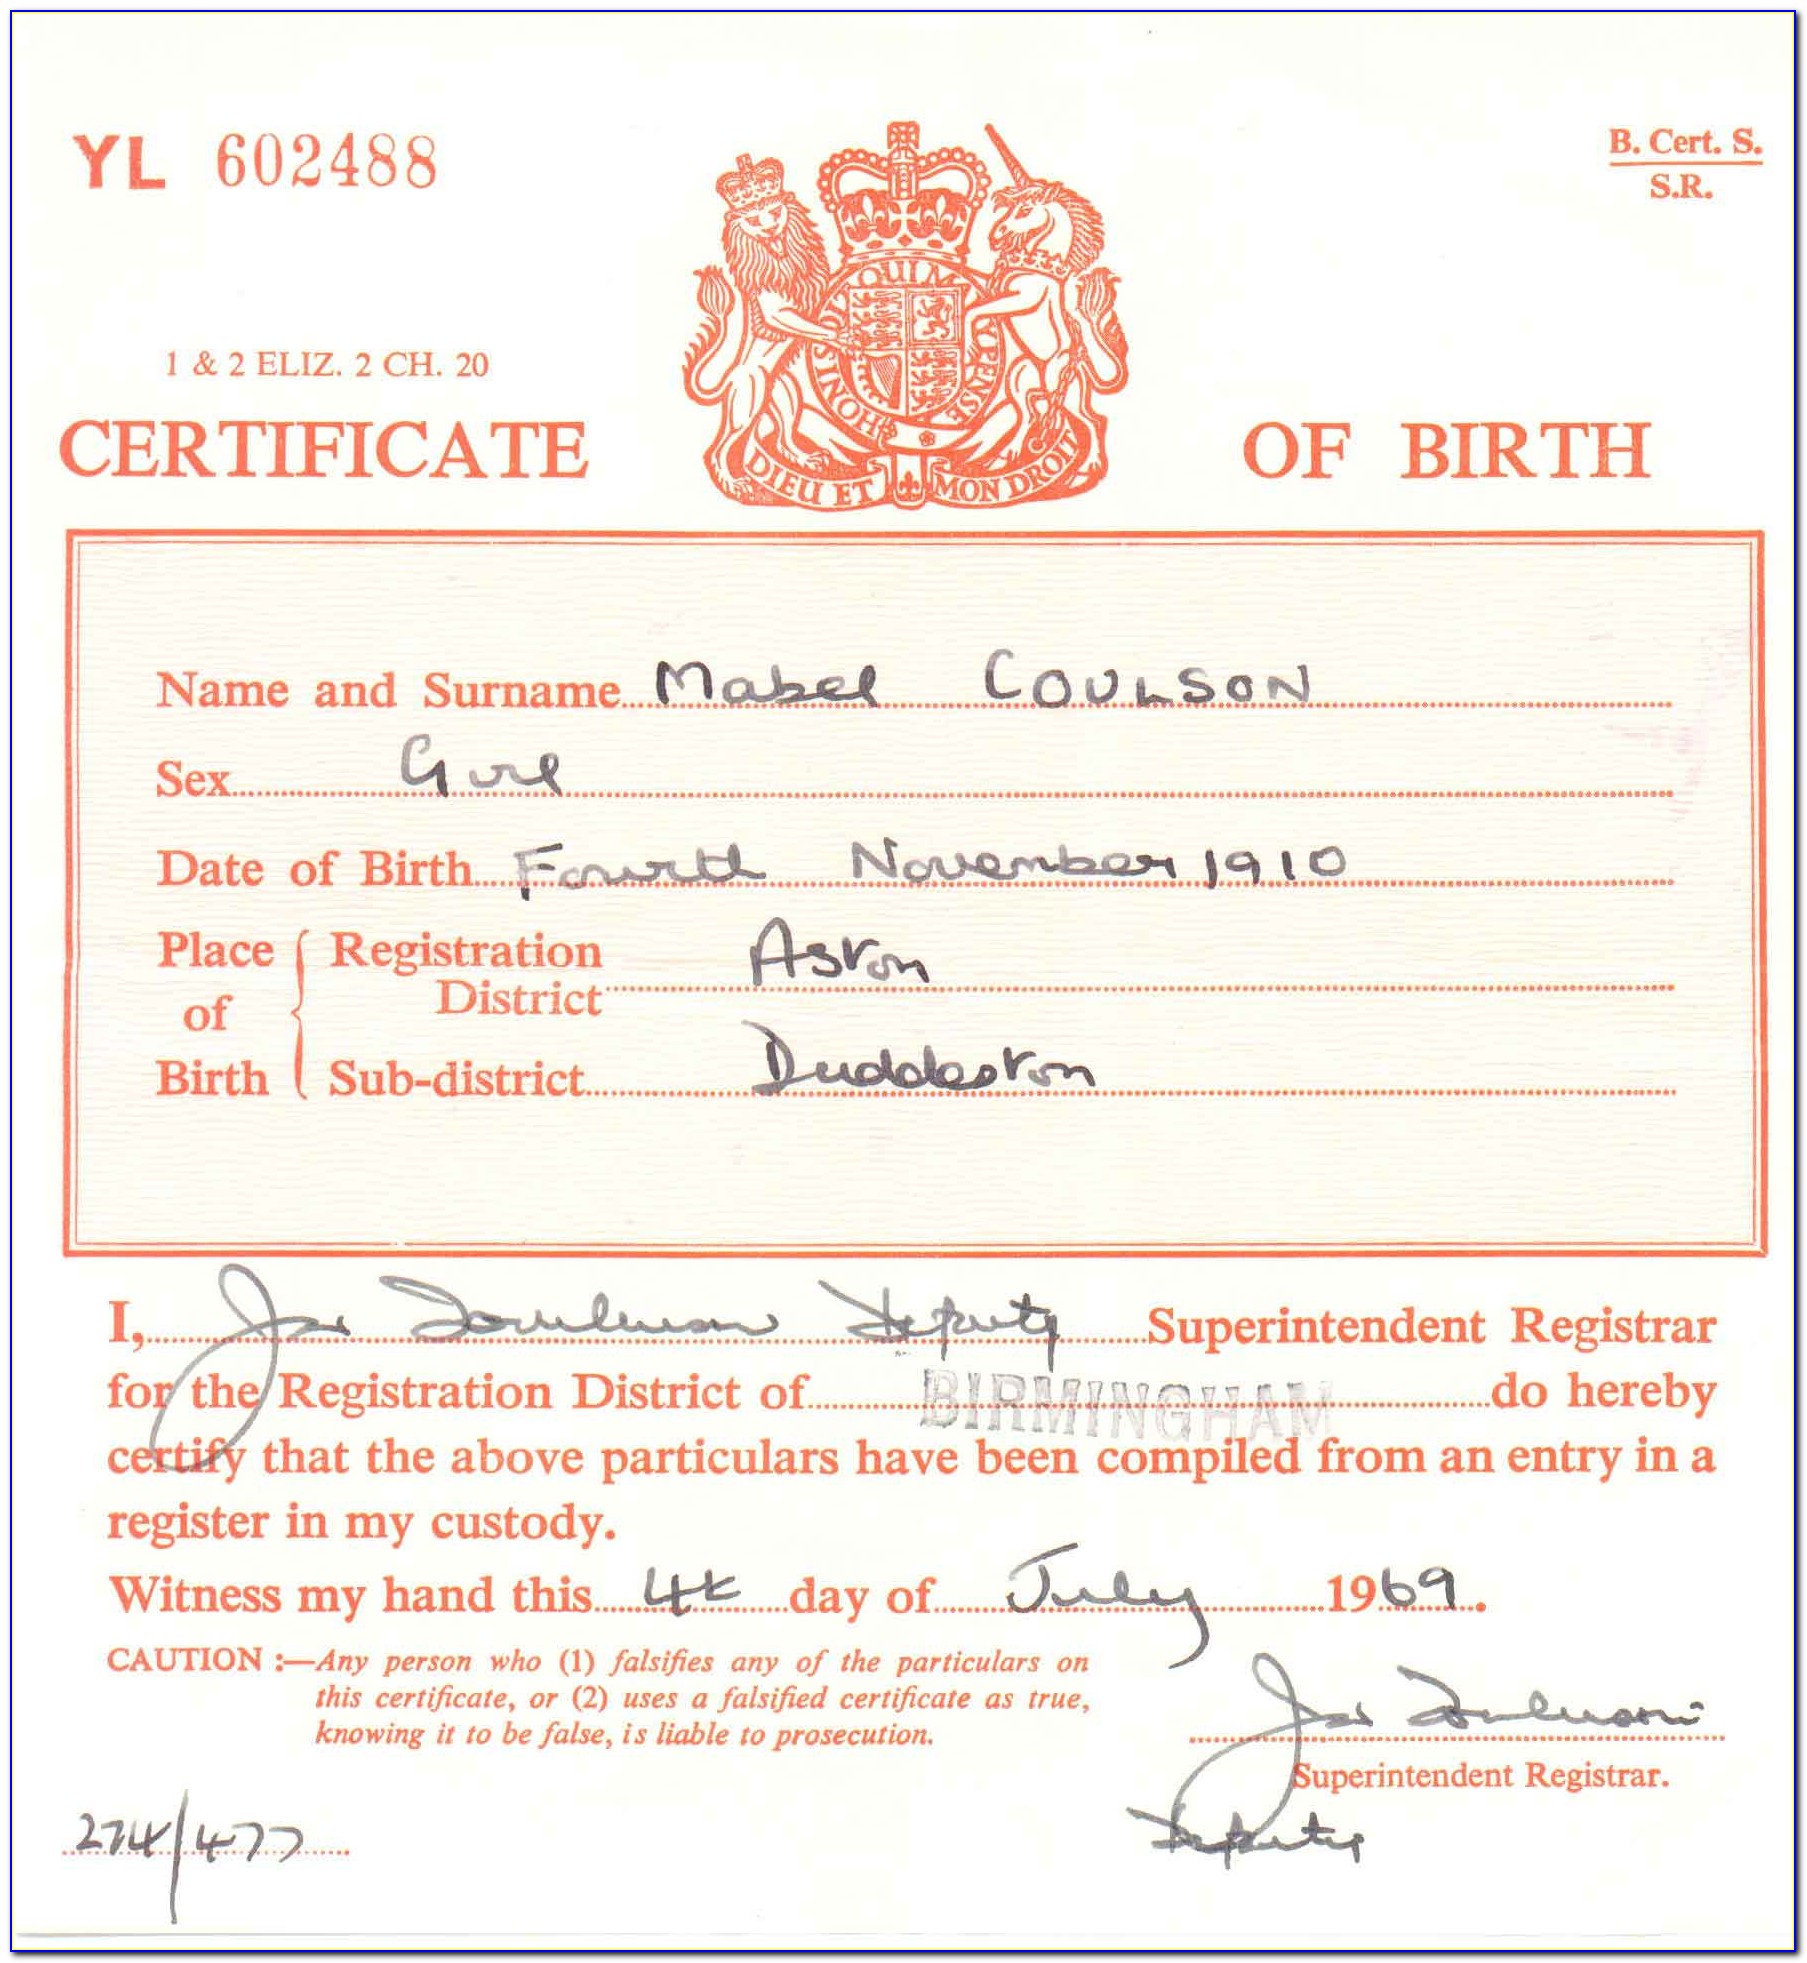 My Birth Certificate Doesn't Have A Registered Number